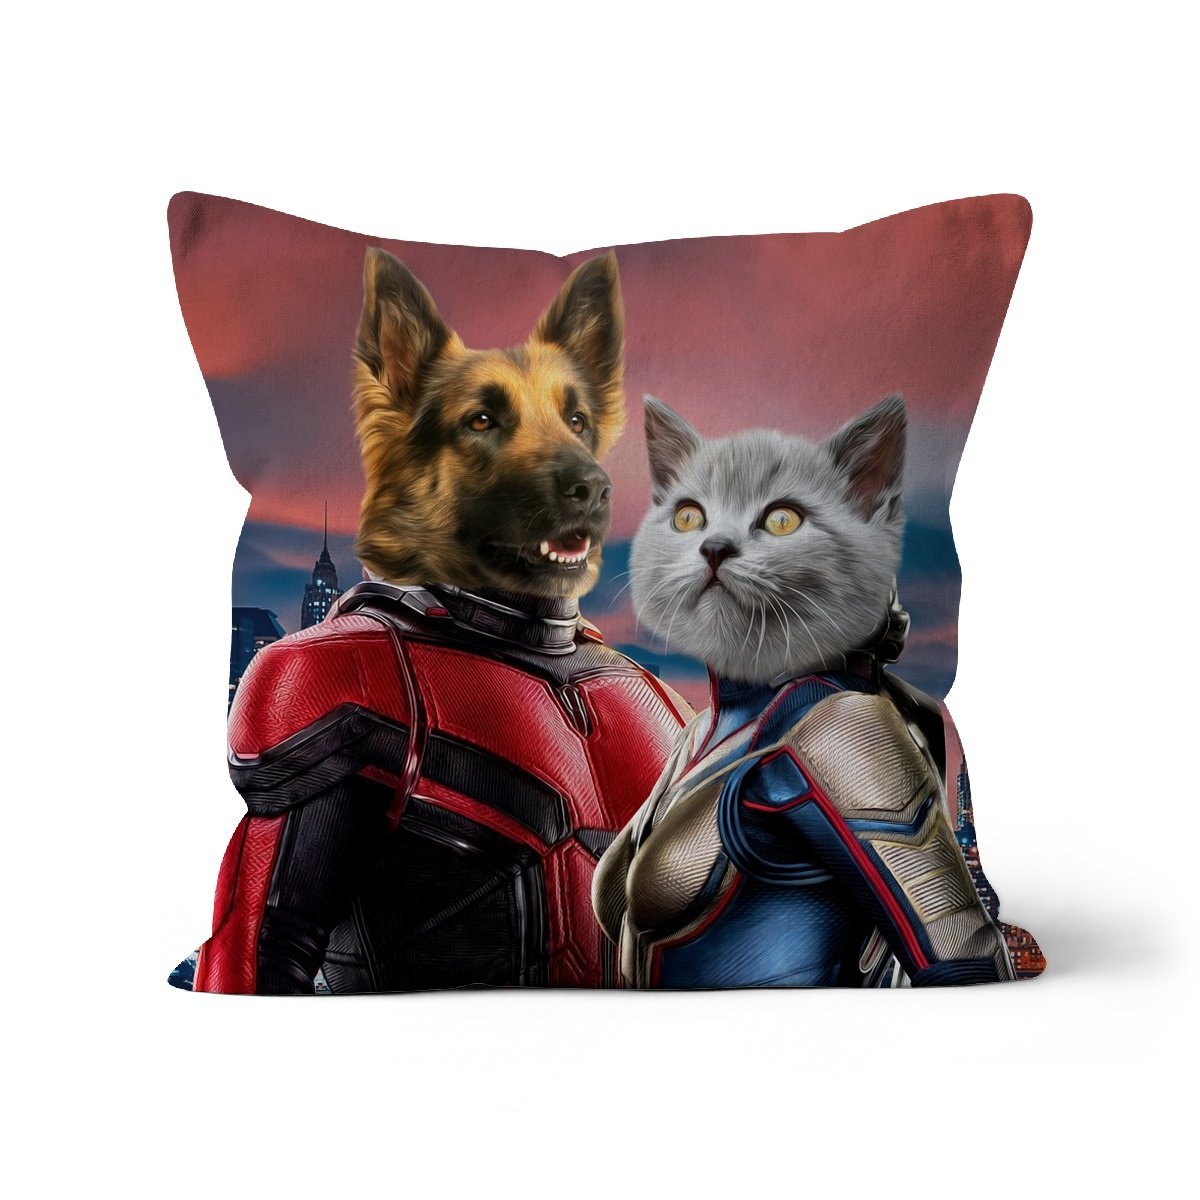 The Antan & The Wasp: Custom Pet Cushion - Paw & Glory - #pet portraits# - #dog portraits# - #pet portraits uk#pawandglory, pet art pillow,pillow personalized, pet face pillows, dog photo on pillow, pet custom pillow, pillows with dogs picture